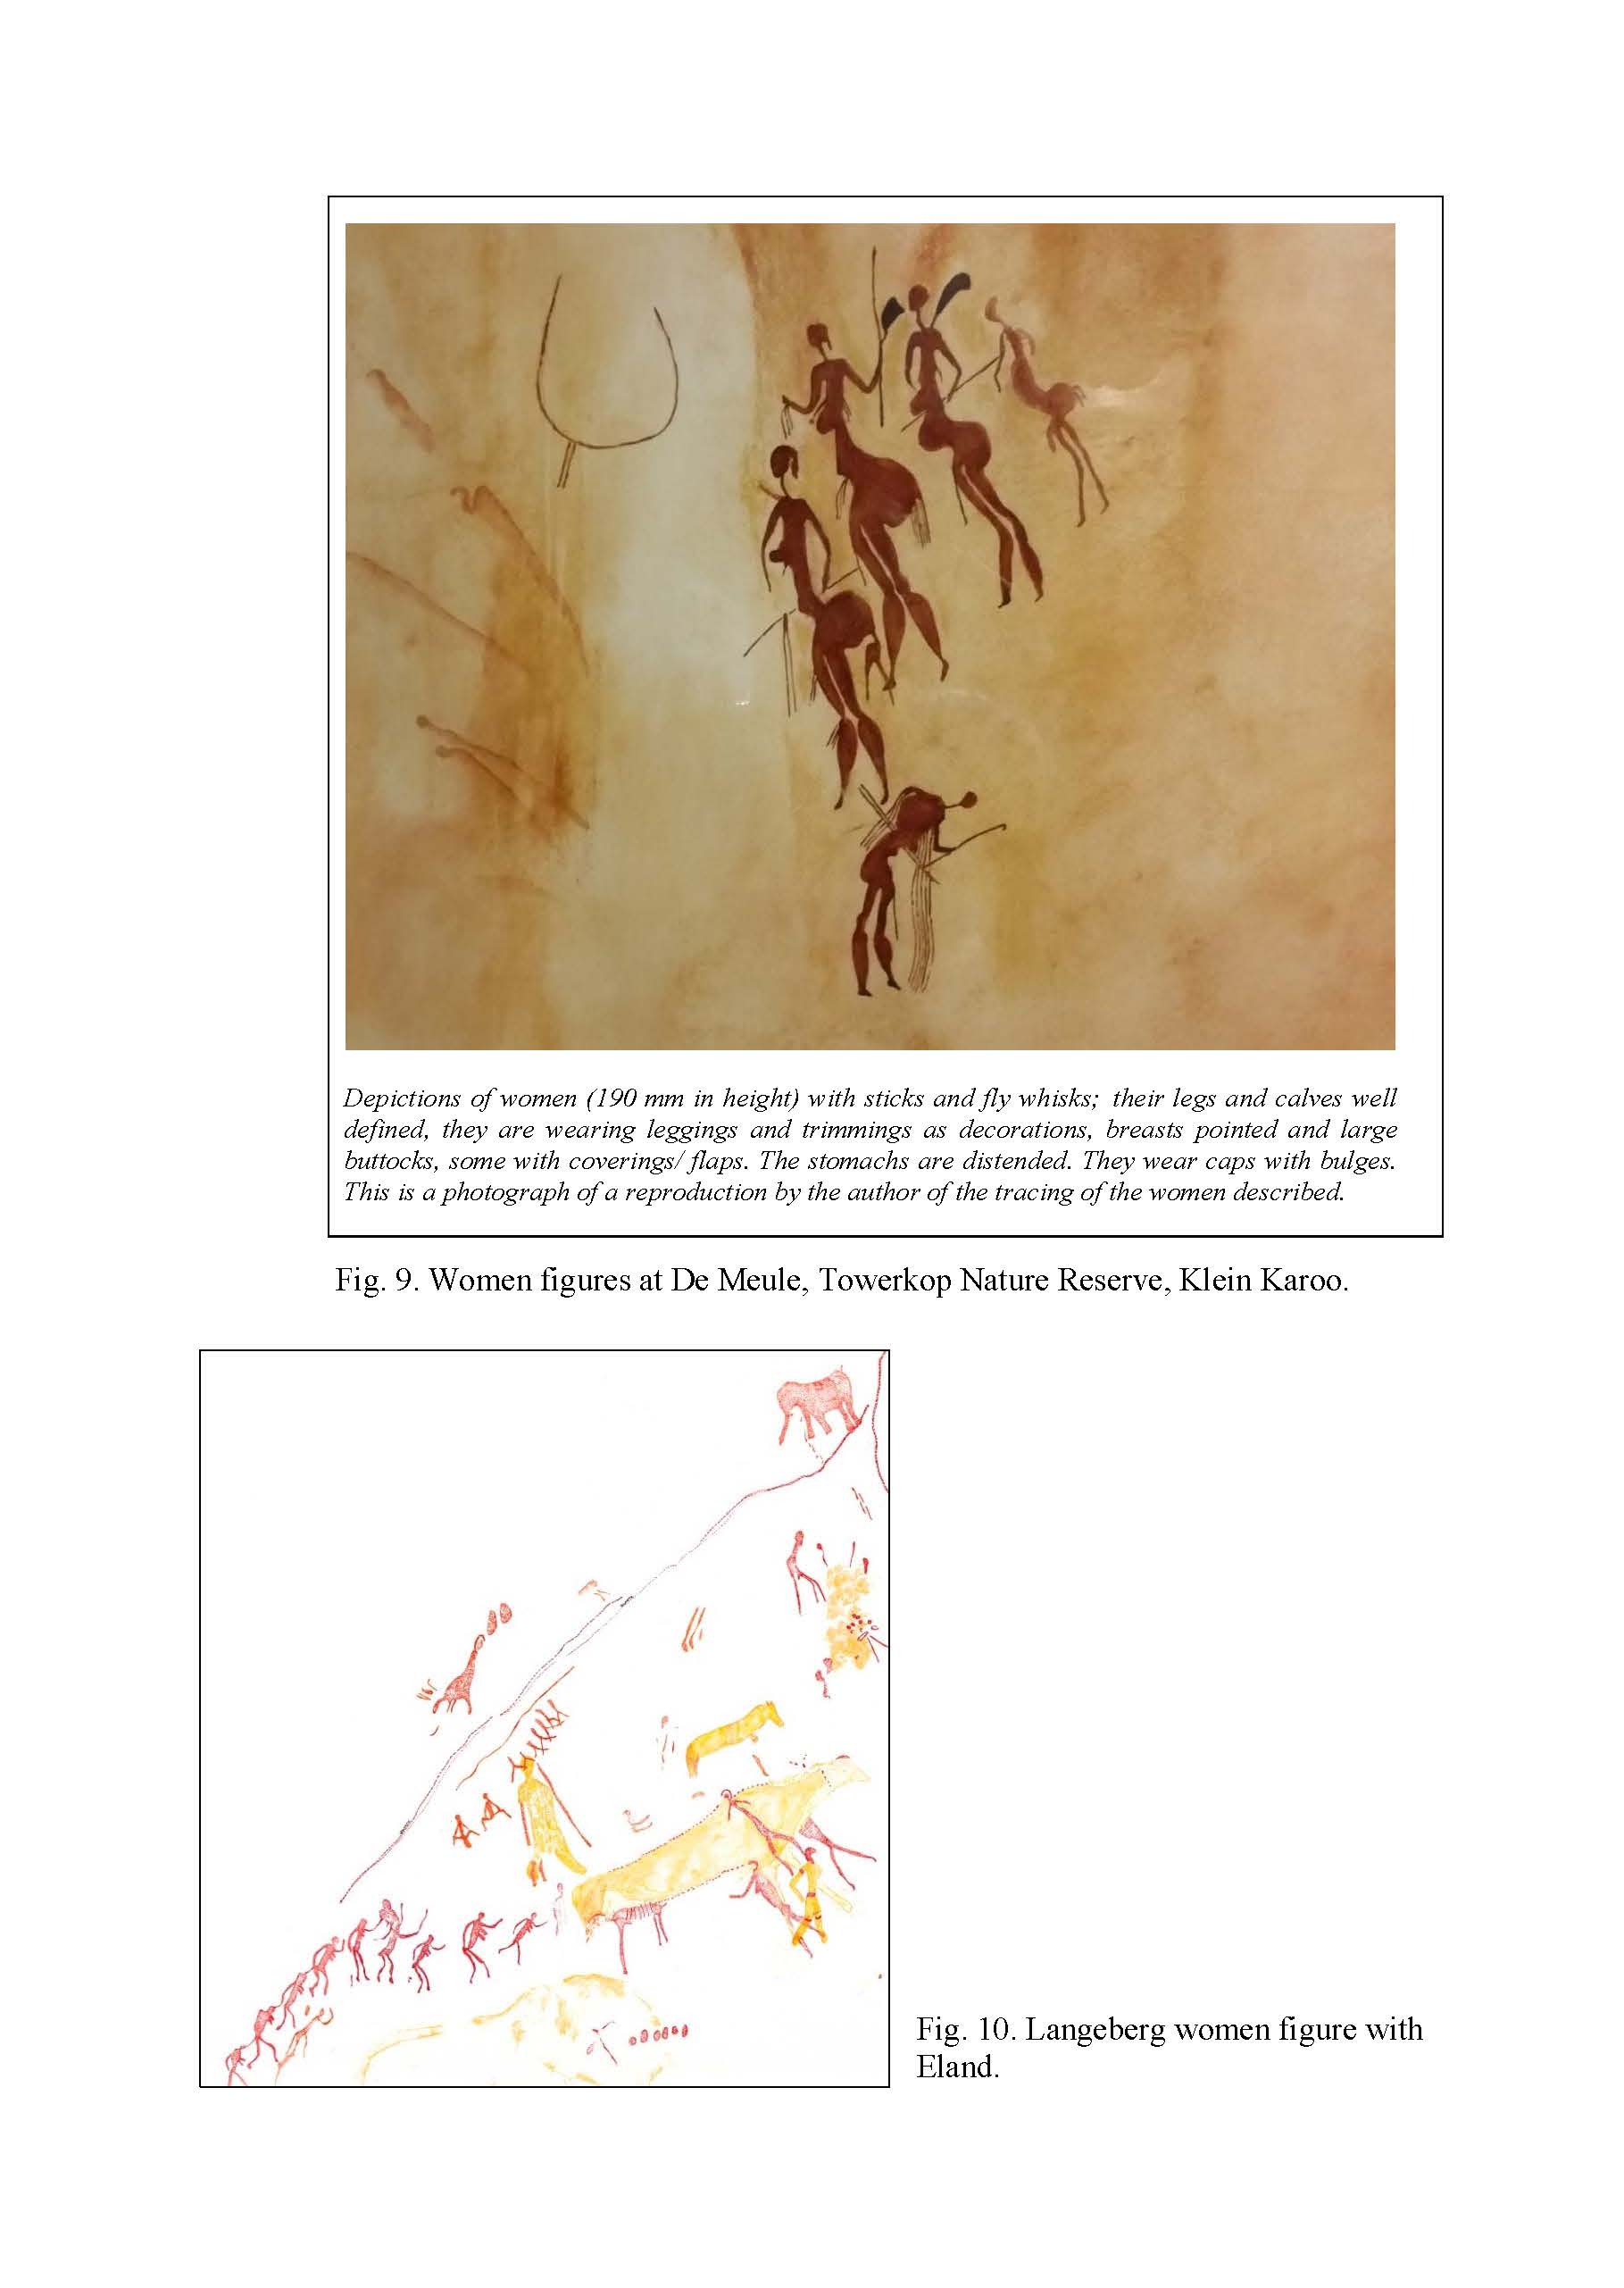 Rock Paintings of the Klein Karoo and a Link to a Local Story